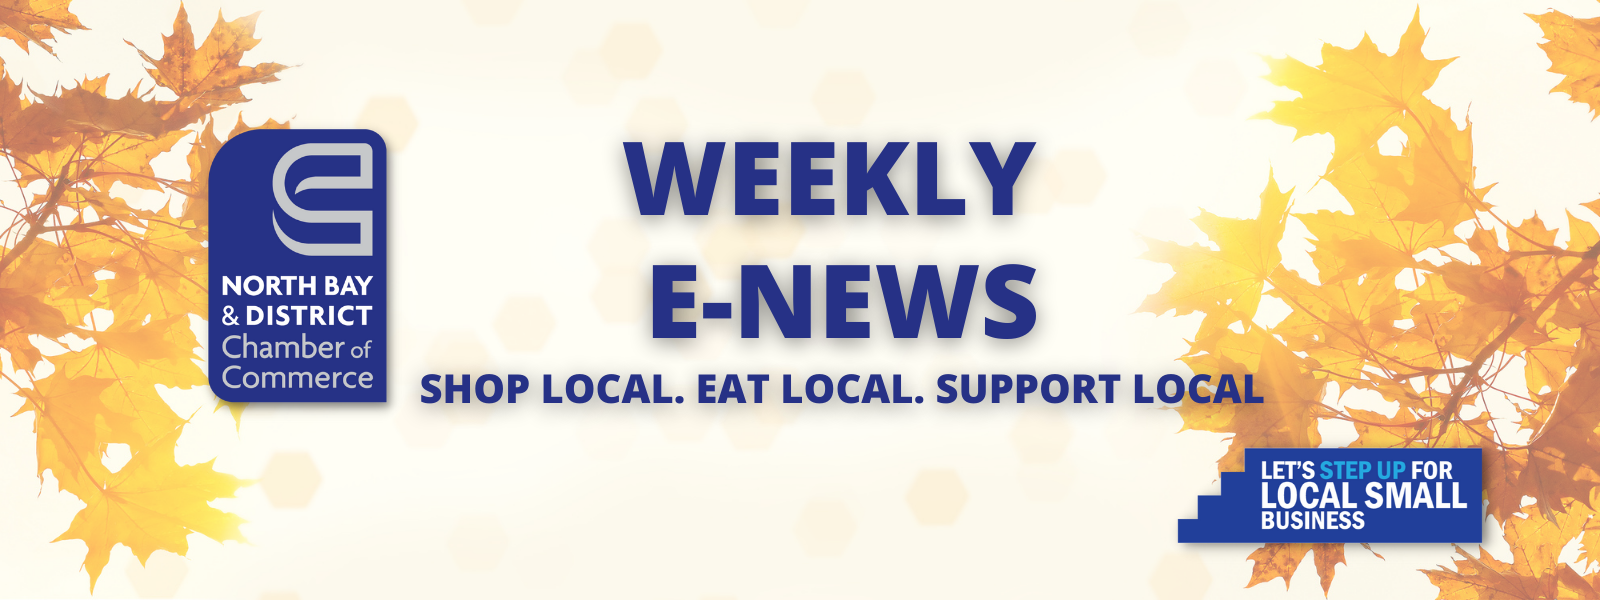 Weekly E-News - North Bay and District Chamber of Commerce Sept Leaves